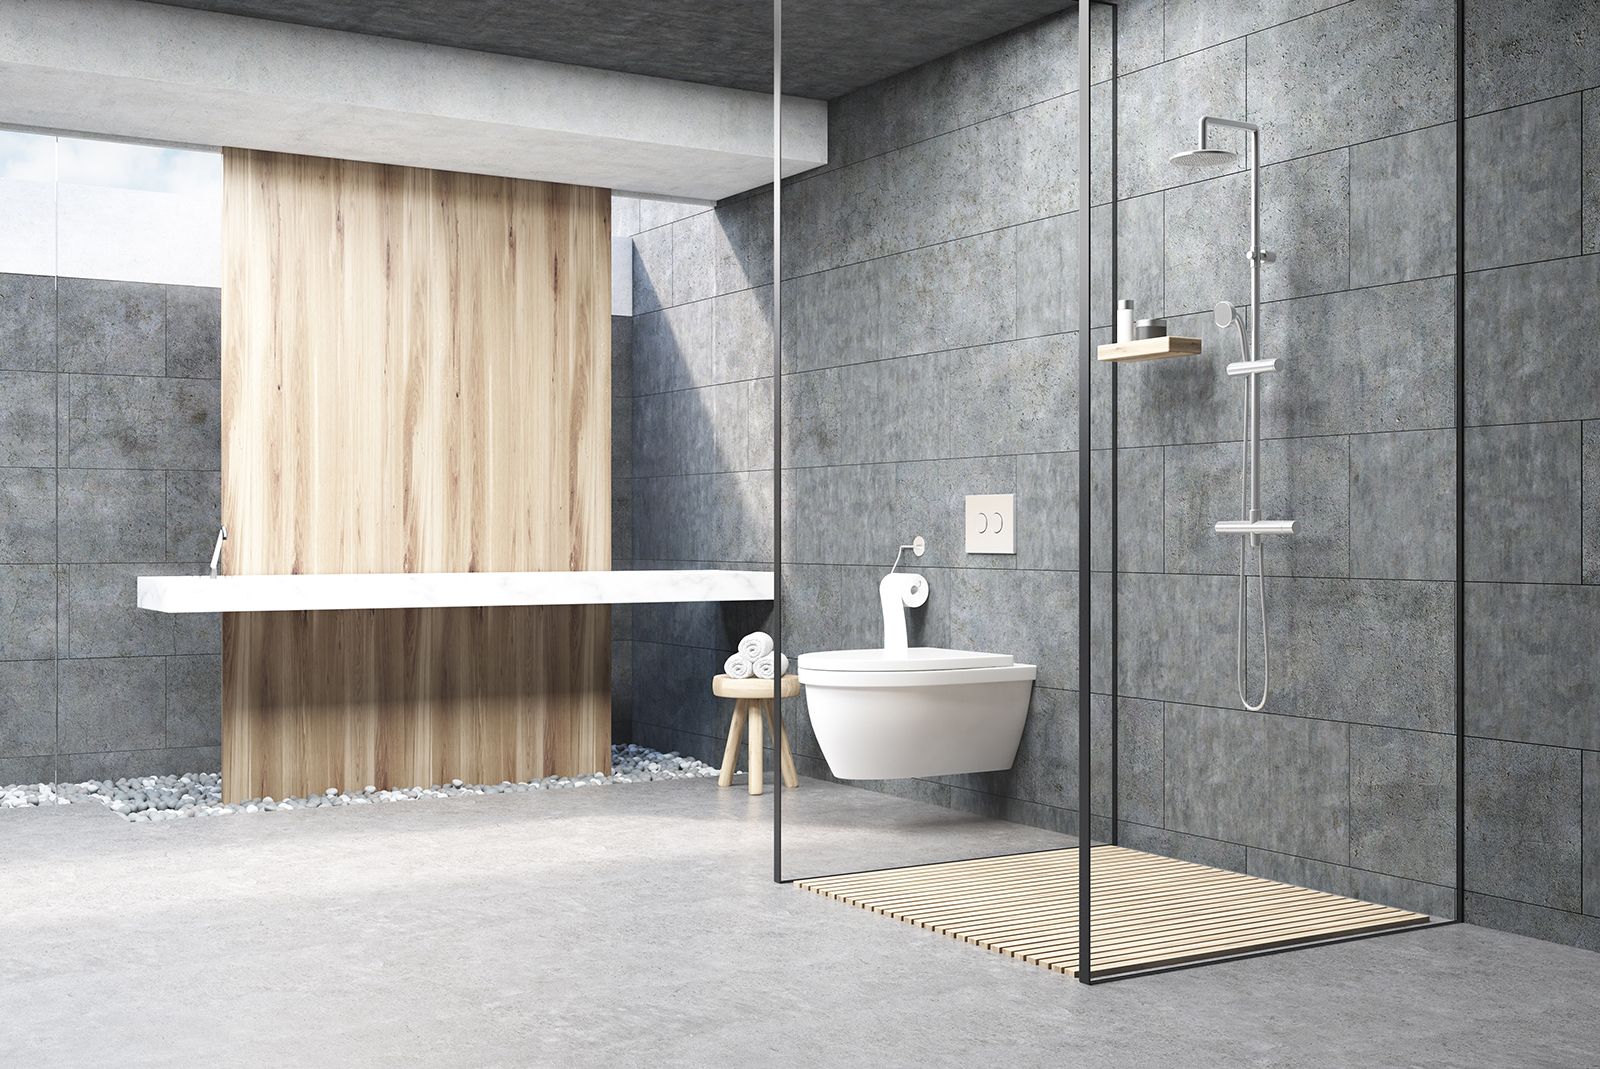 8 types of shower screens to consider for your bathroom